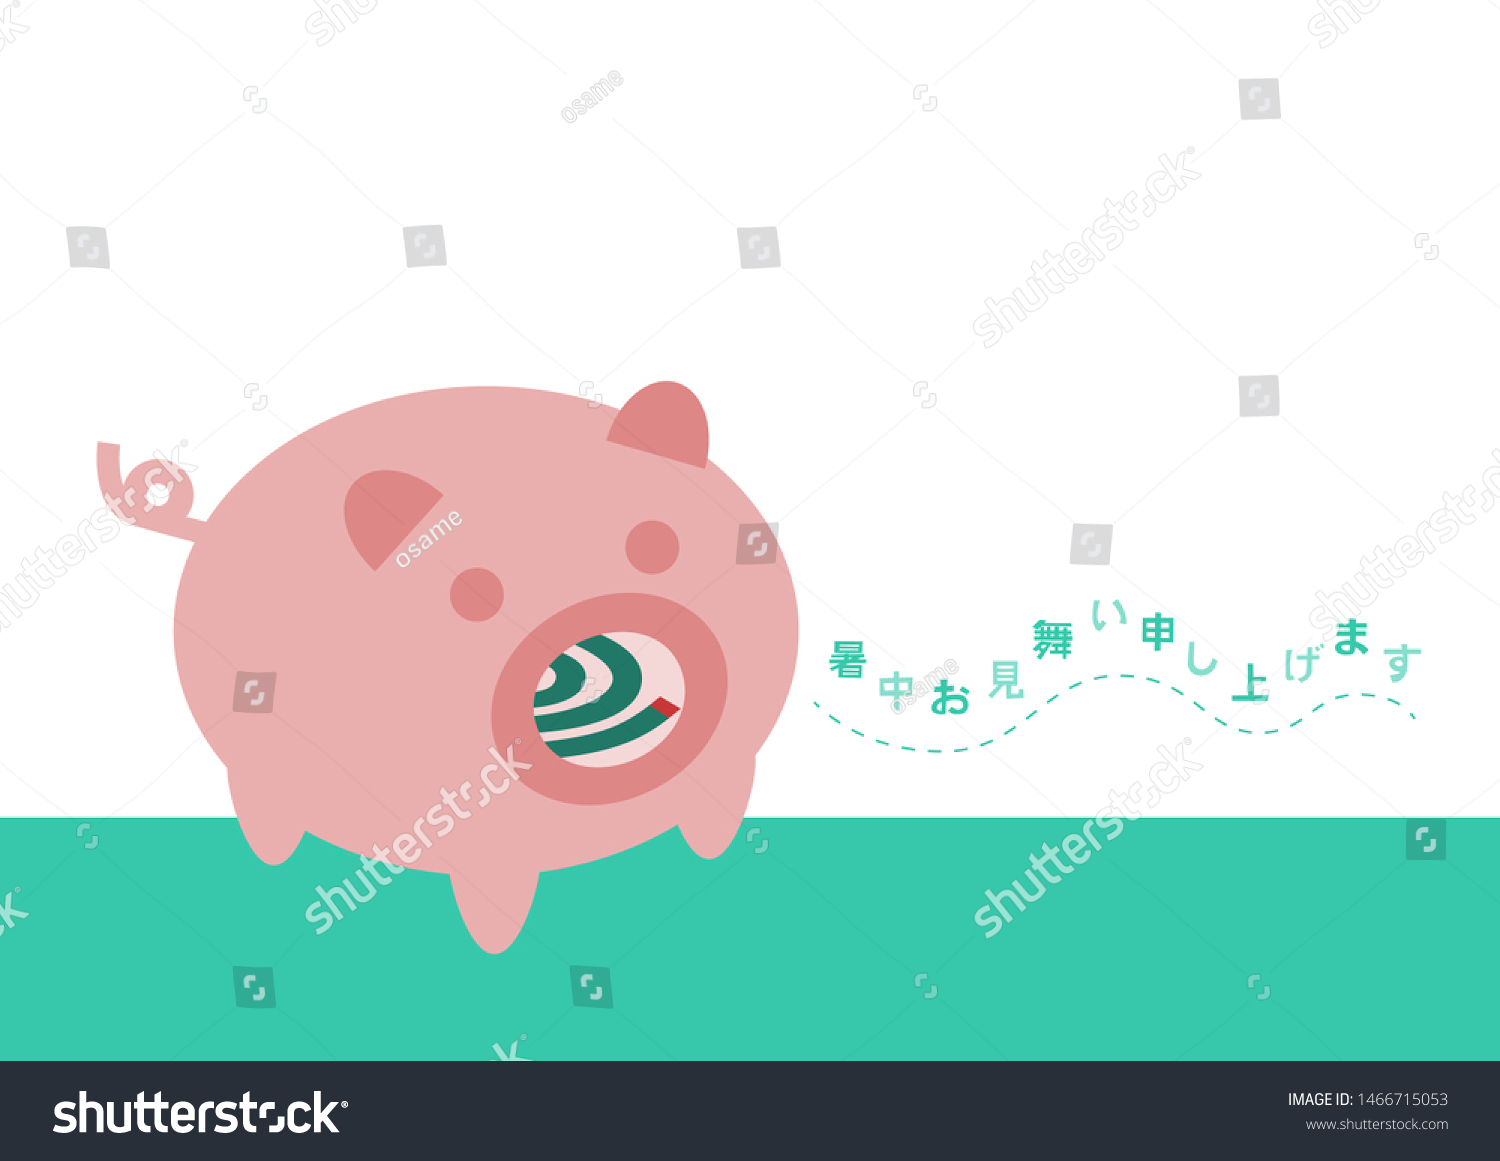 SVG of Pig-shaped mosquito coil holder and summer.  Vector illustration.
Japanese language translation: Summer greetings to you. svg